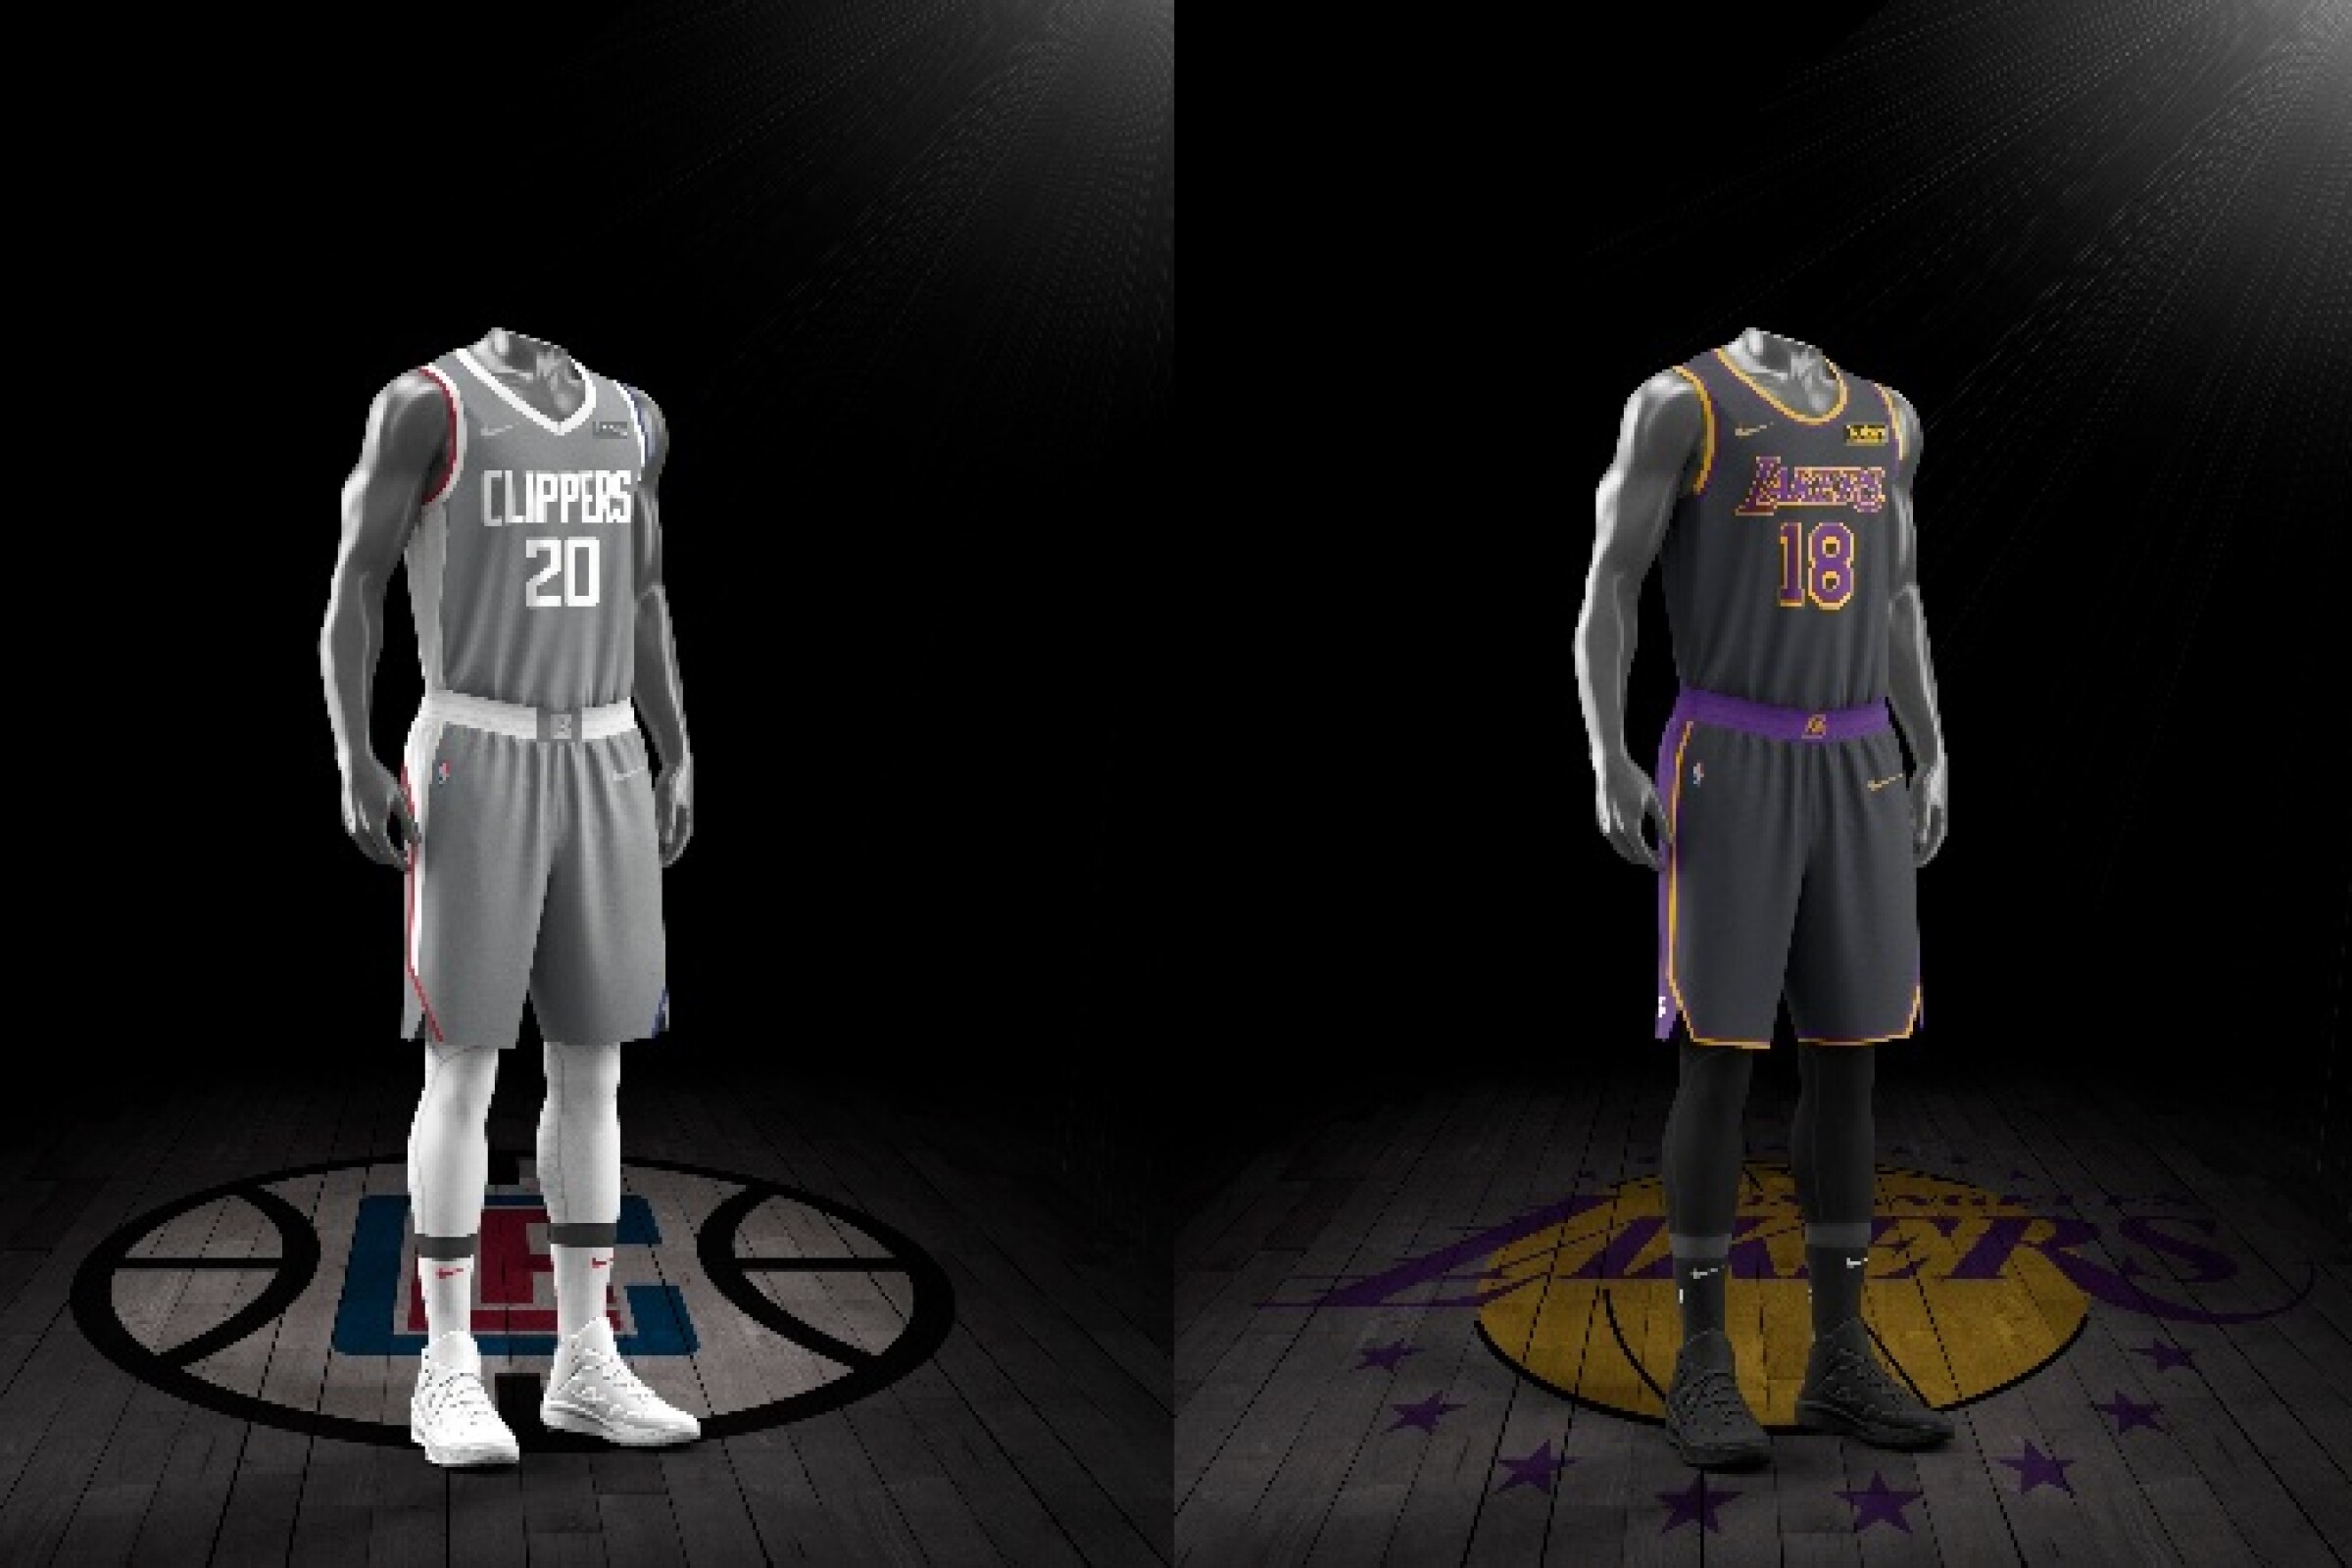 The Clippers and Lakers "Earned Edition" uniforms